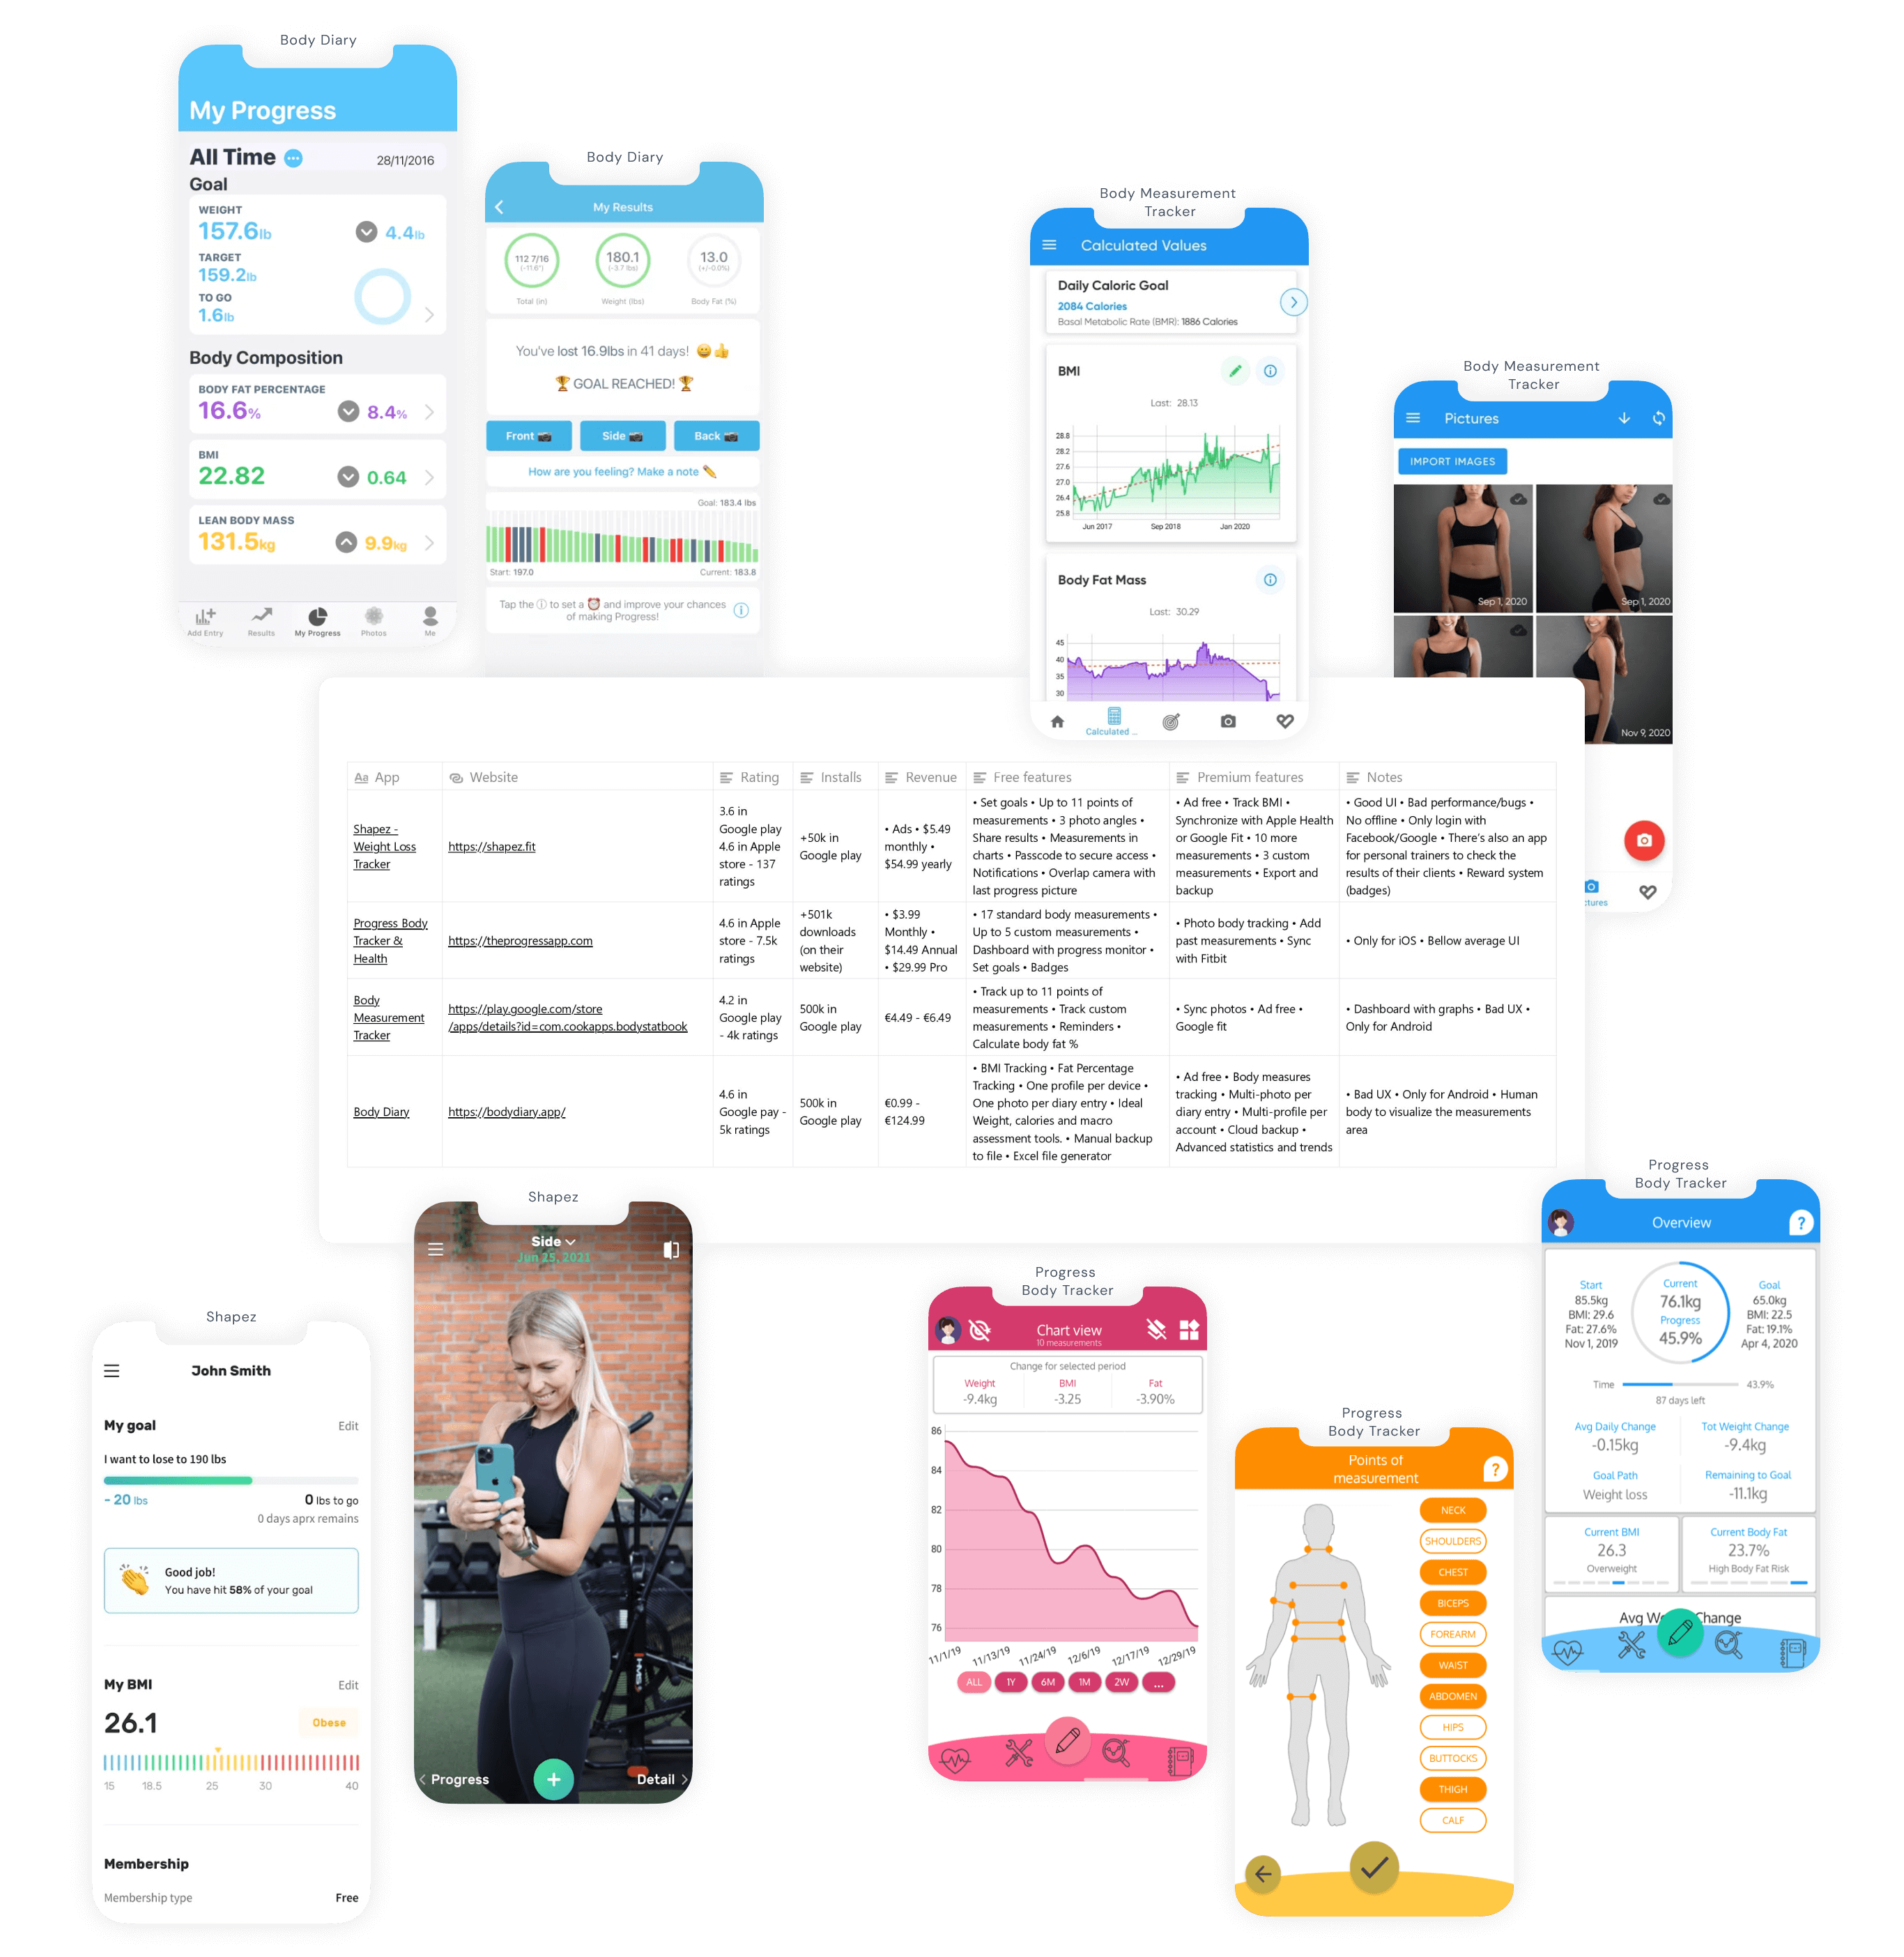 Market researched apps